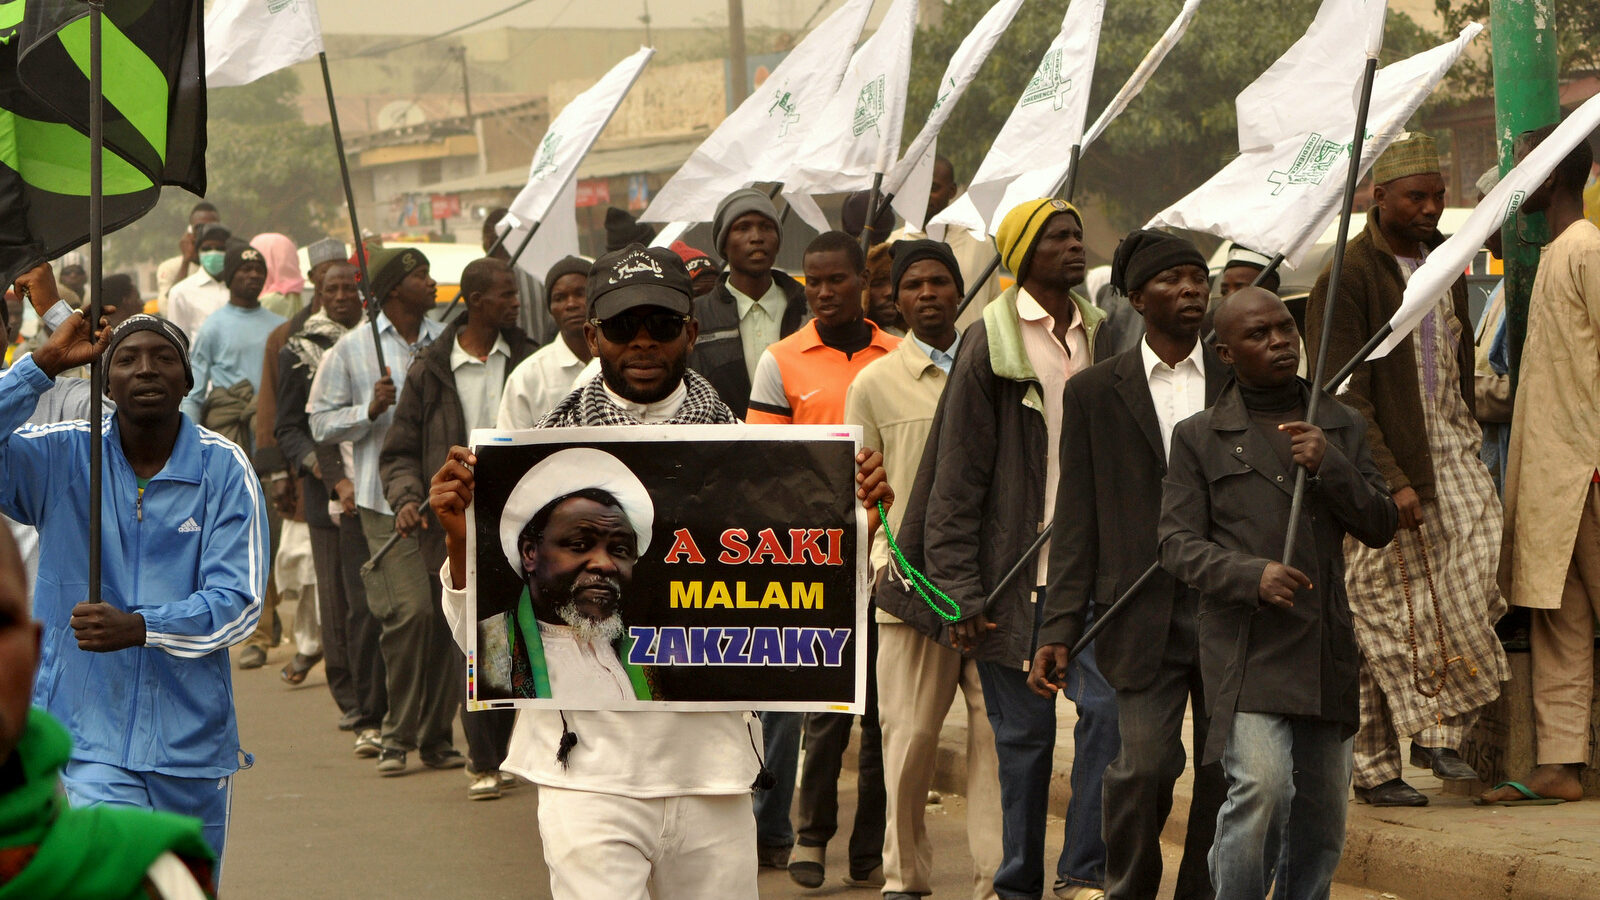 Nigeria Shiite Muslims hold religious flags and banners in a procession celebrating Prophet Muhammad’s birthday and also demanding the release of Shiite leader Ibraheem Zakzaky, on posters, in Kano, Nigeria, Thursday, Dec. 24, 2015. The demonstration was in part provoked after a recent attack by Nigerian soldiers who fired on unarmed Islamic Shiite children with no provocation, killing some hundreds of the minority group in the West African nation, according to a report from Human Rights Watch. (AP Photo/Muhammed Giginyu)